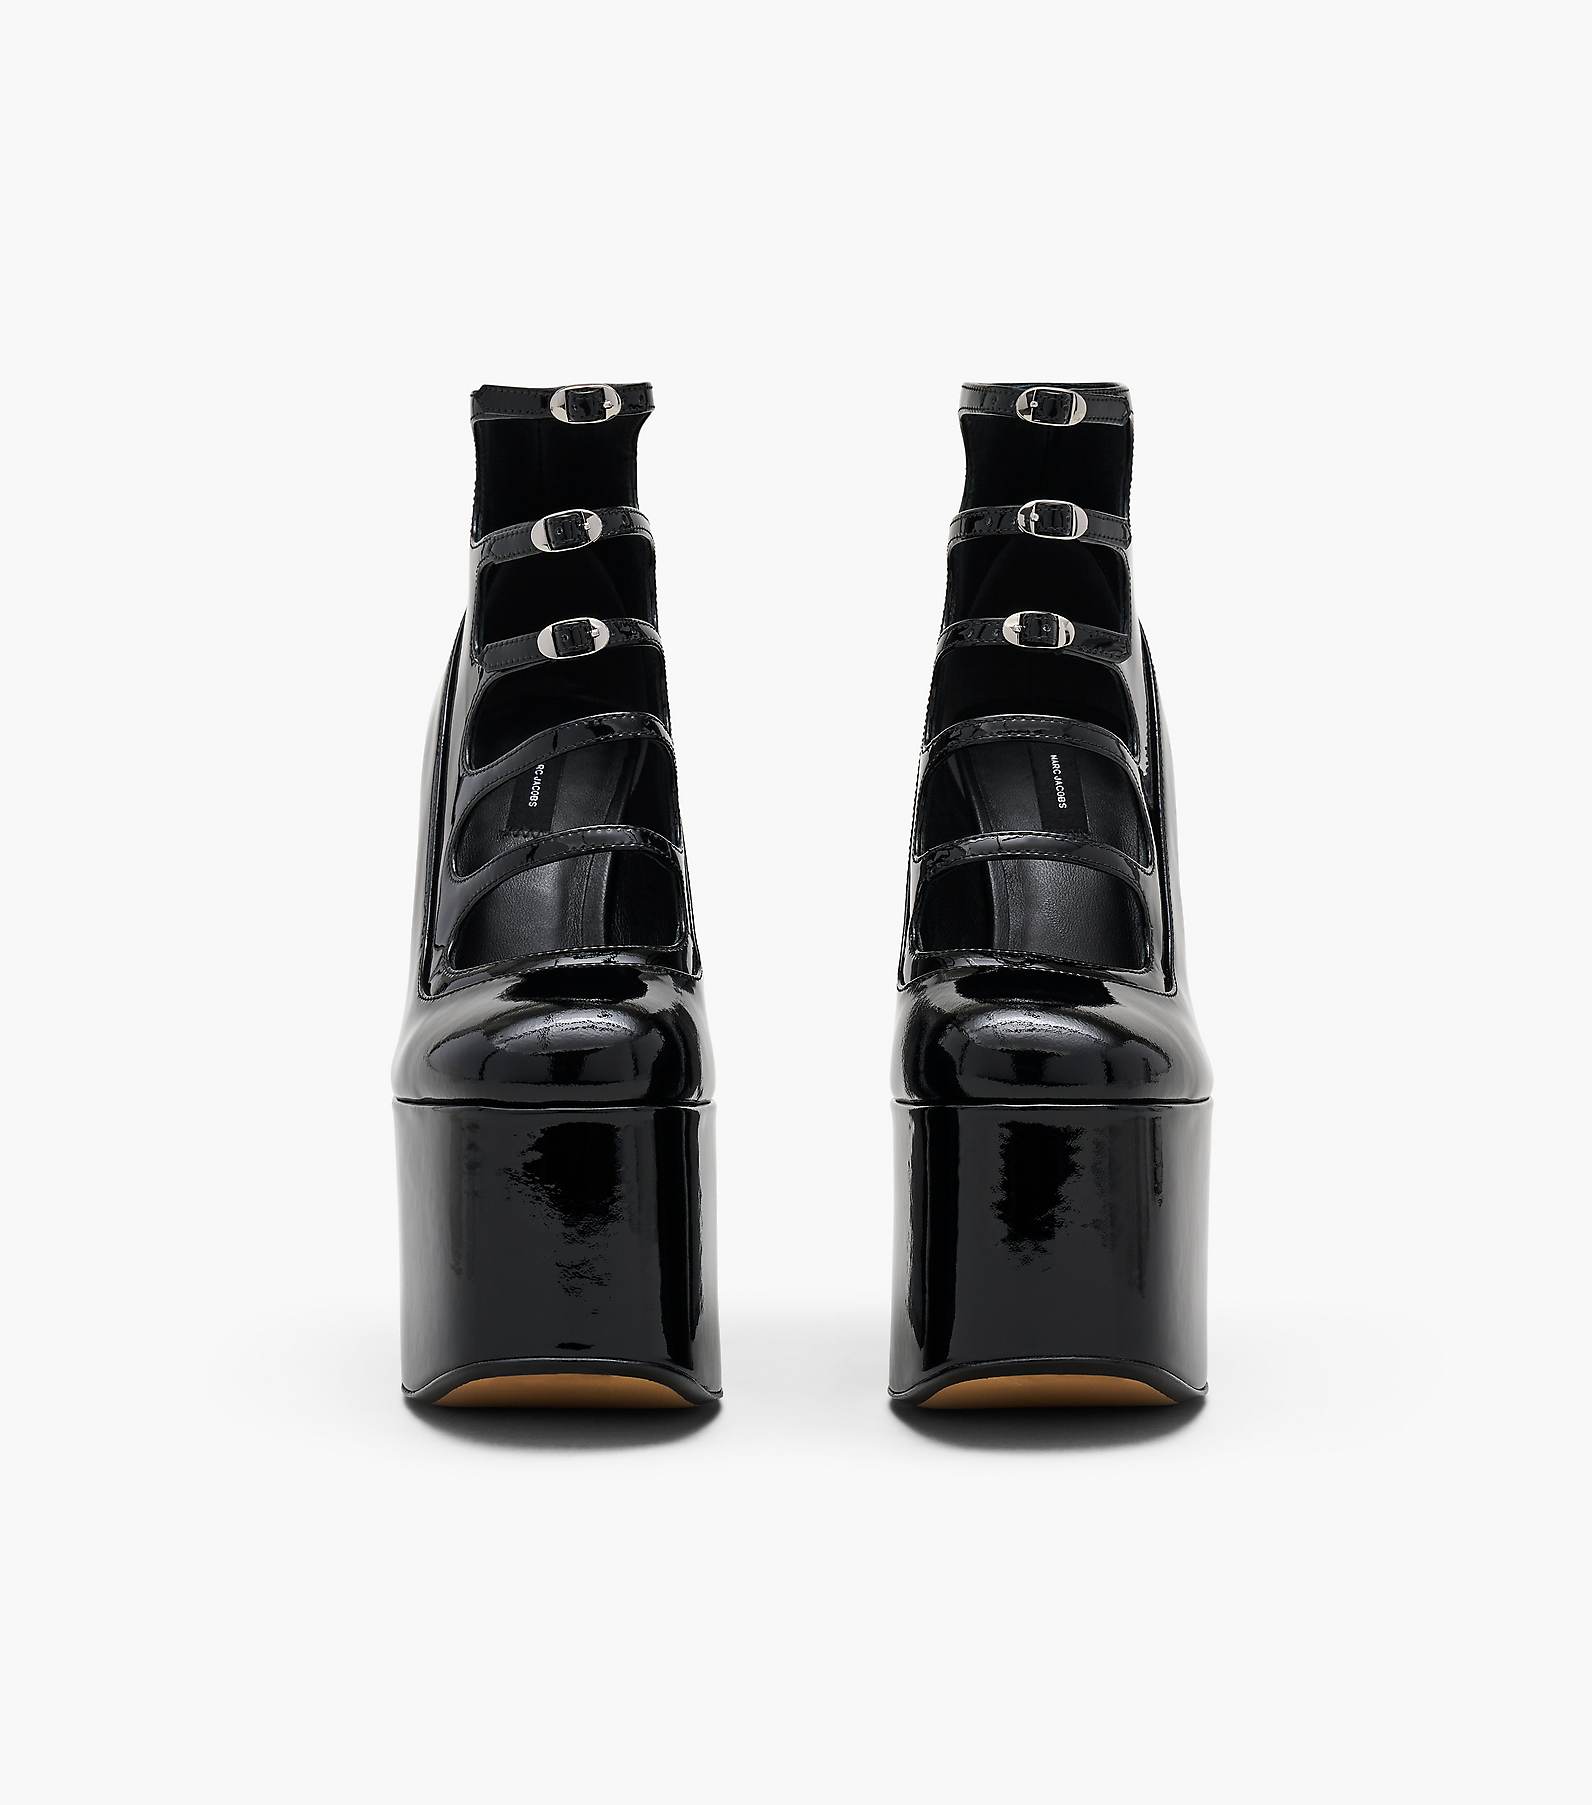 The Patent Leather Kiki Ankle Boot